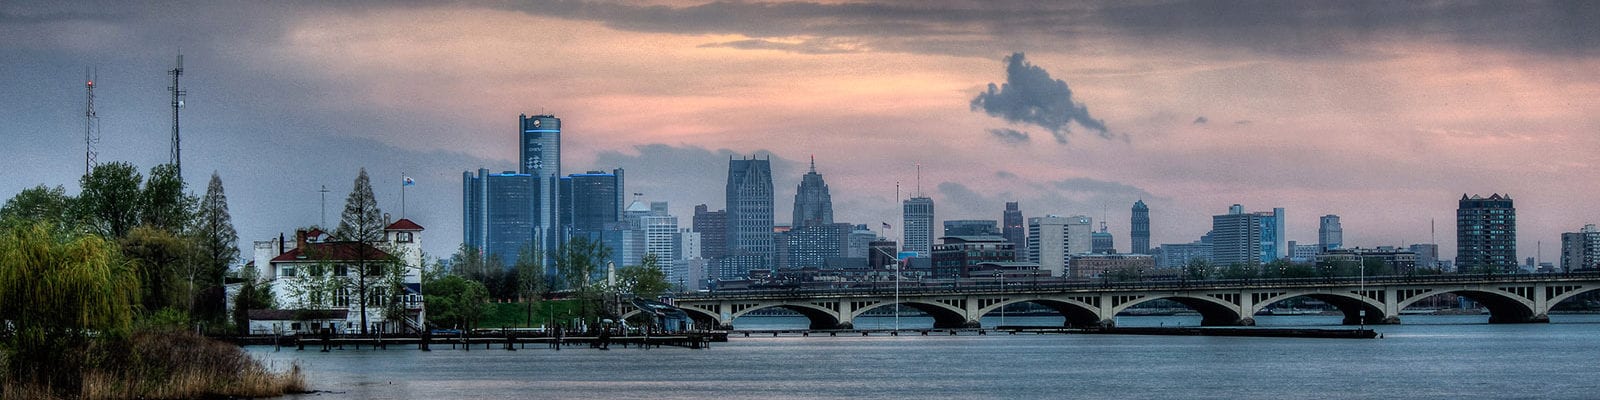 Detroit skyline with the MacArthur bridge leading to Belle Isle and Detroit Boat Club in the foreground. Photo taken from Belle Isle fishing pier.